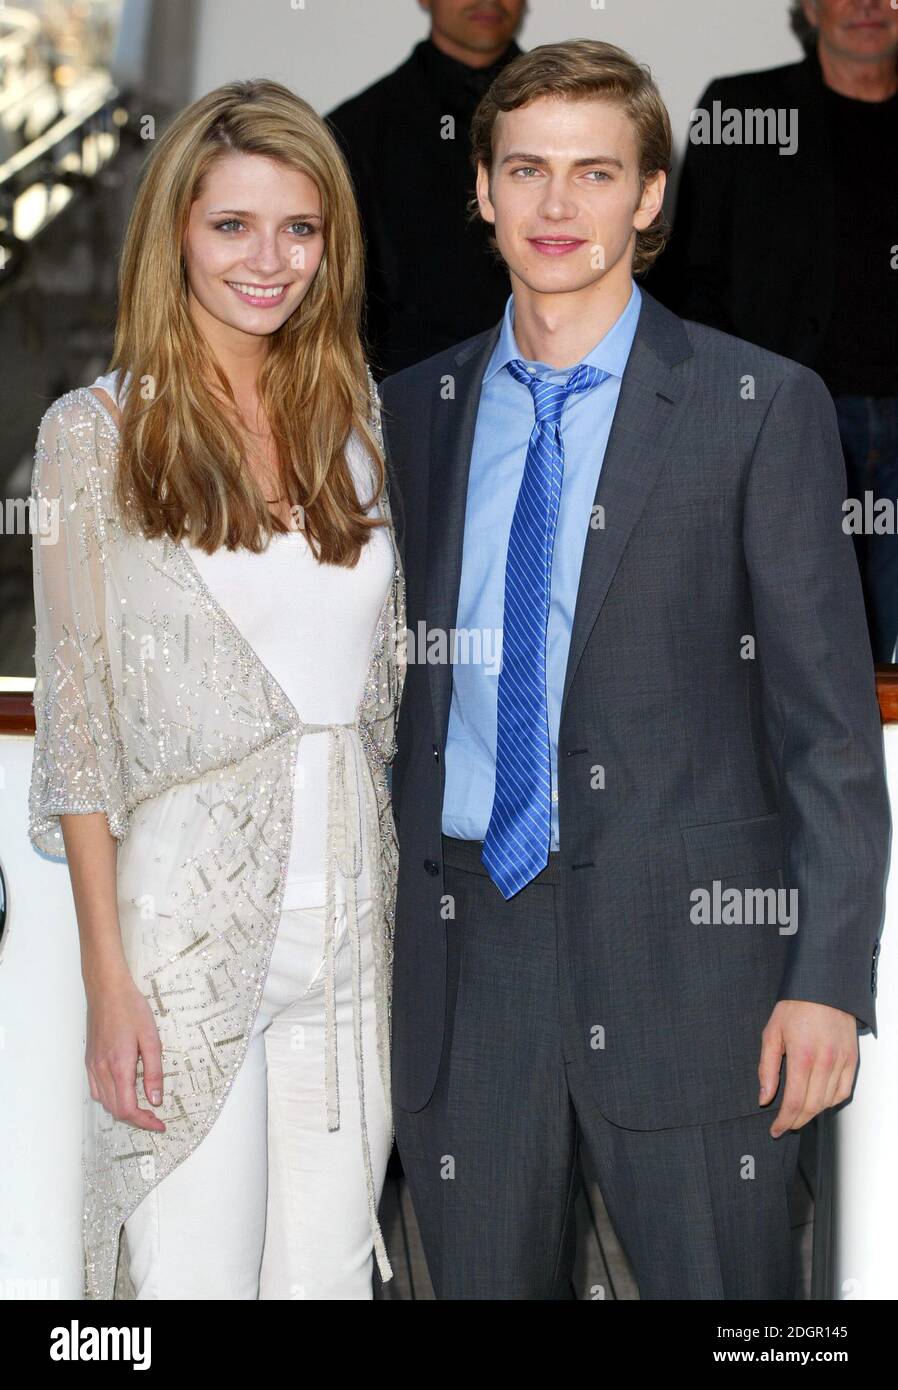 Hayden Christensen and Mischa Barton at the Decameron photocall, Cannes harbour. Part of the 58th Festival De Cannes. Doug Peters/allactiondigital.com   Stock Photo